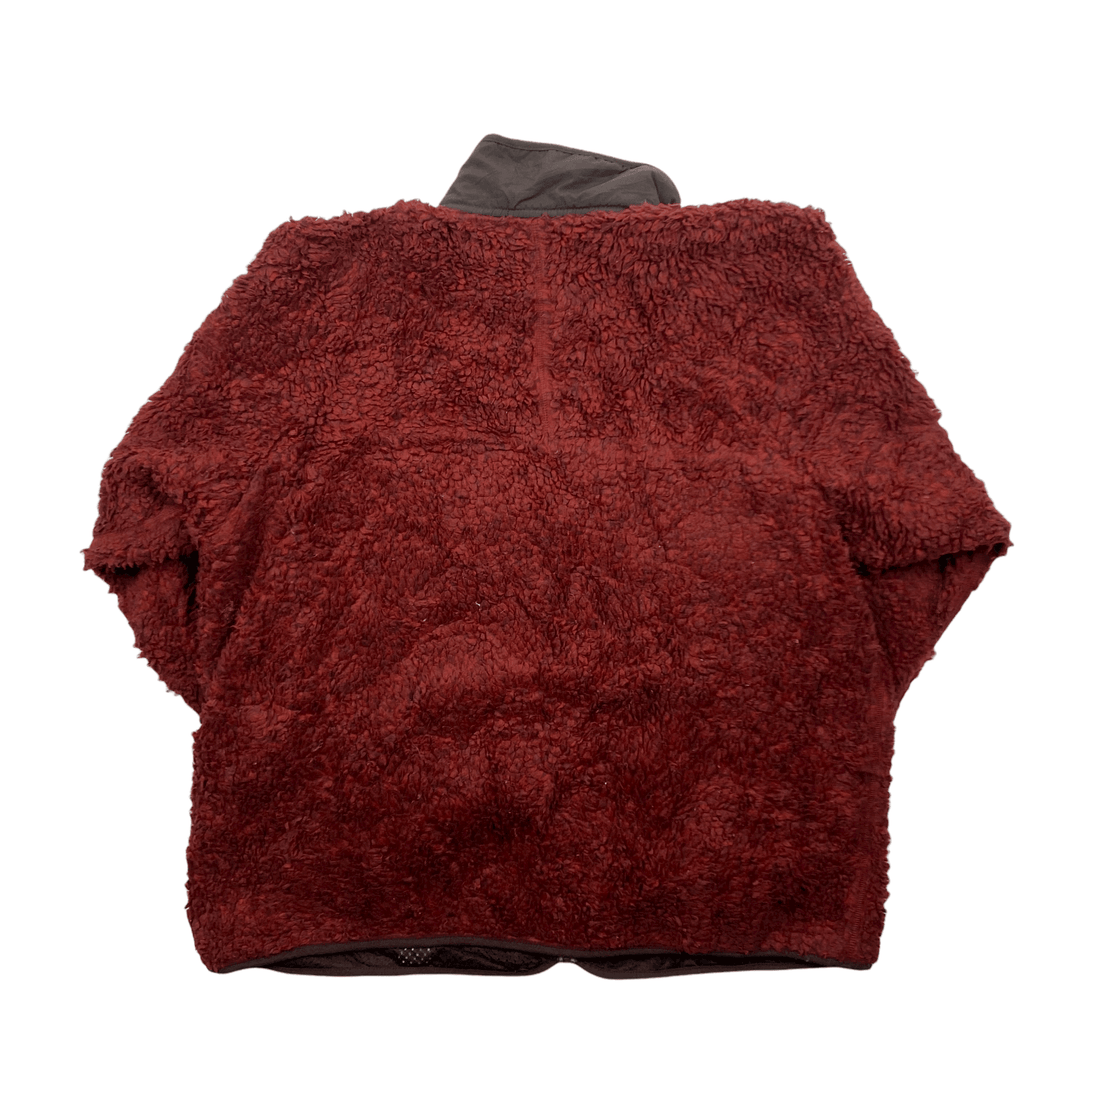 Vintage 90s Red/ Maroon/ Brown Patagonia Full Zip Sherpa Classic Retro X Deep Pile Fleece Jacket - XXL (Recommended Size - Extra Large) - The Streetwear Studio